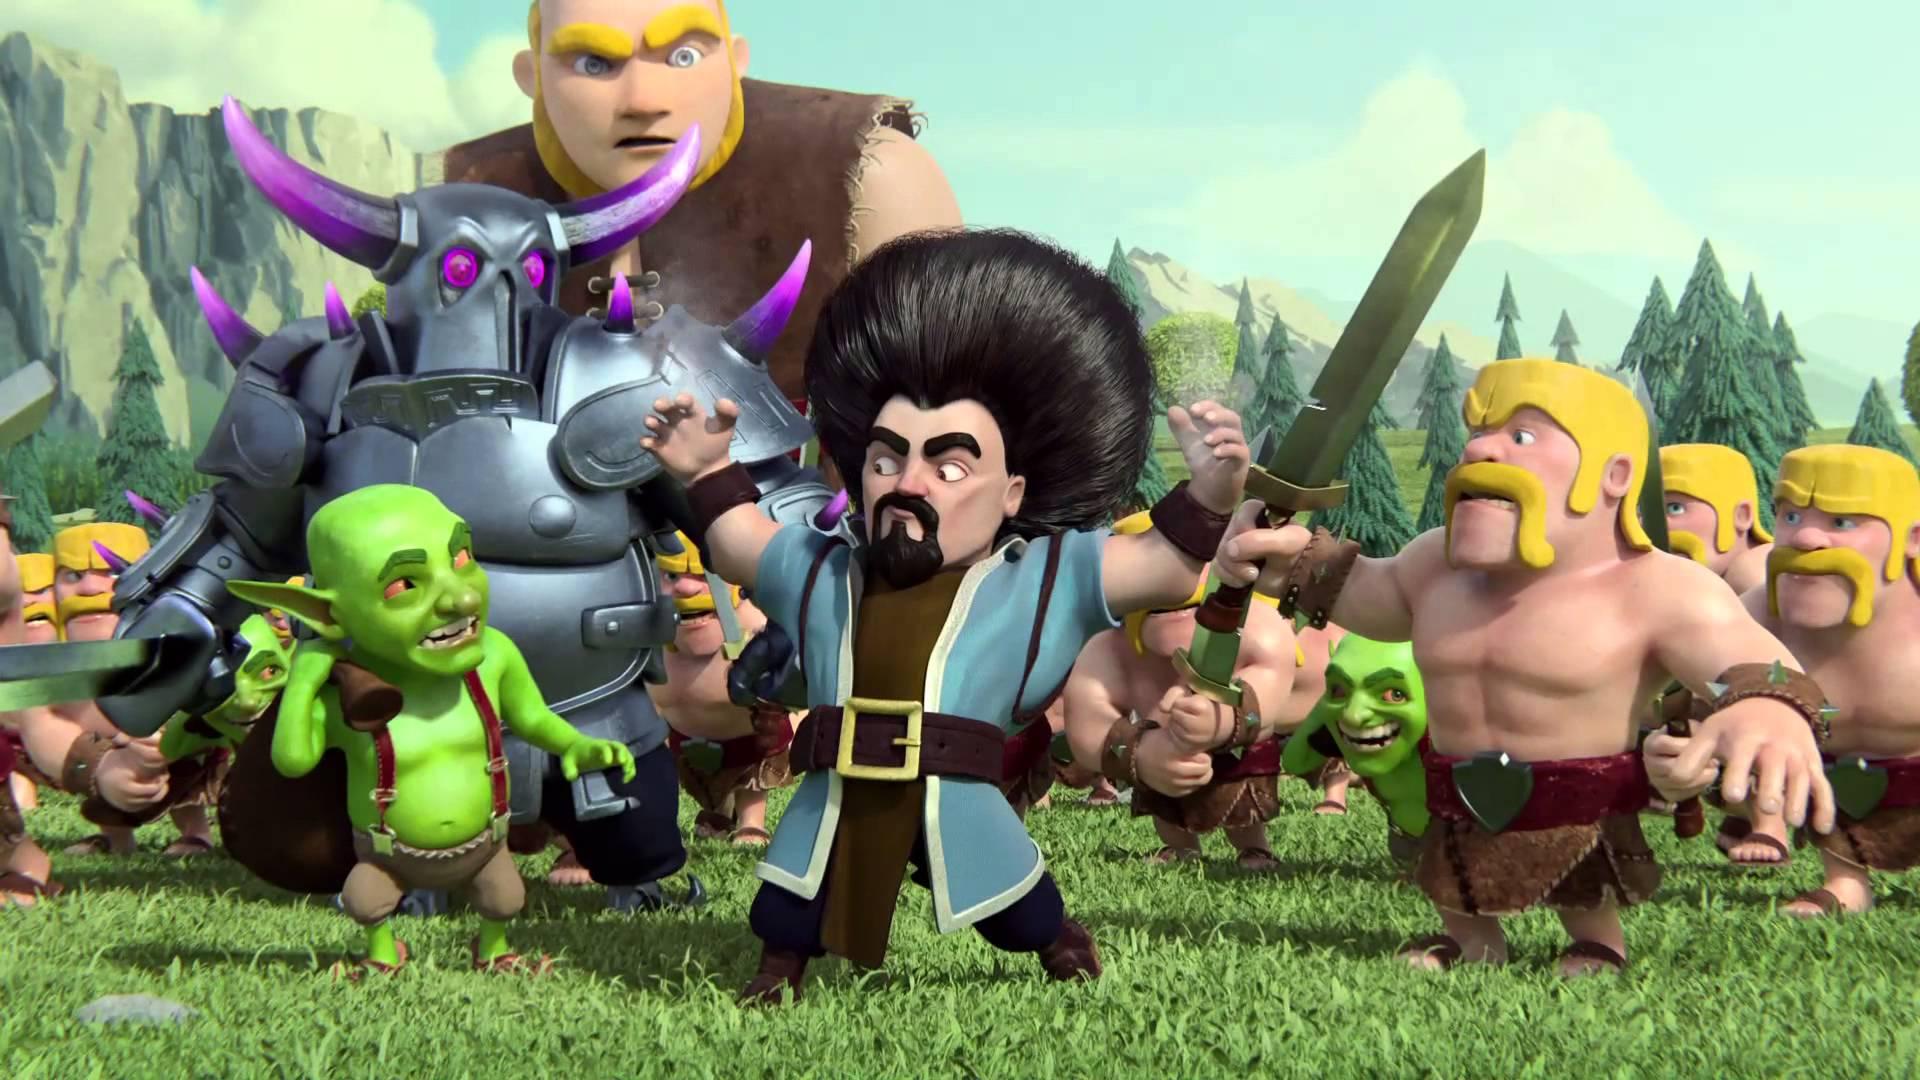 Clash Of Clans 4k Wallpaper, Clash Of Clans, Game